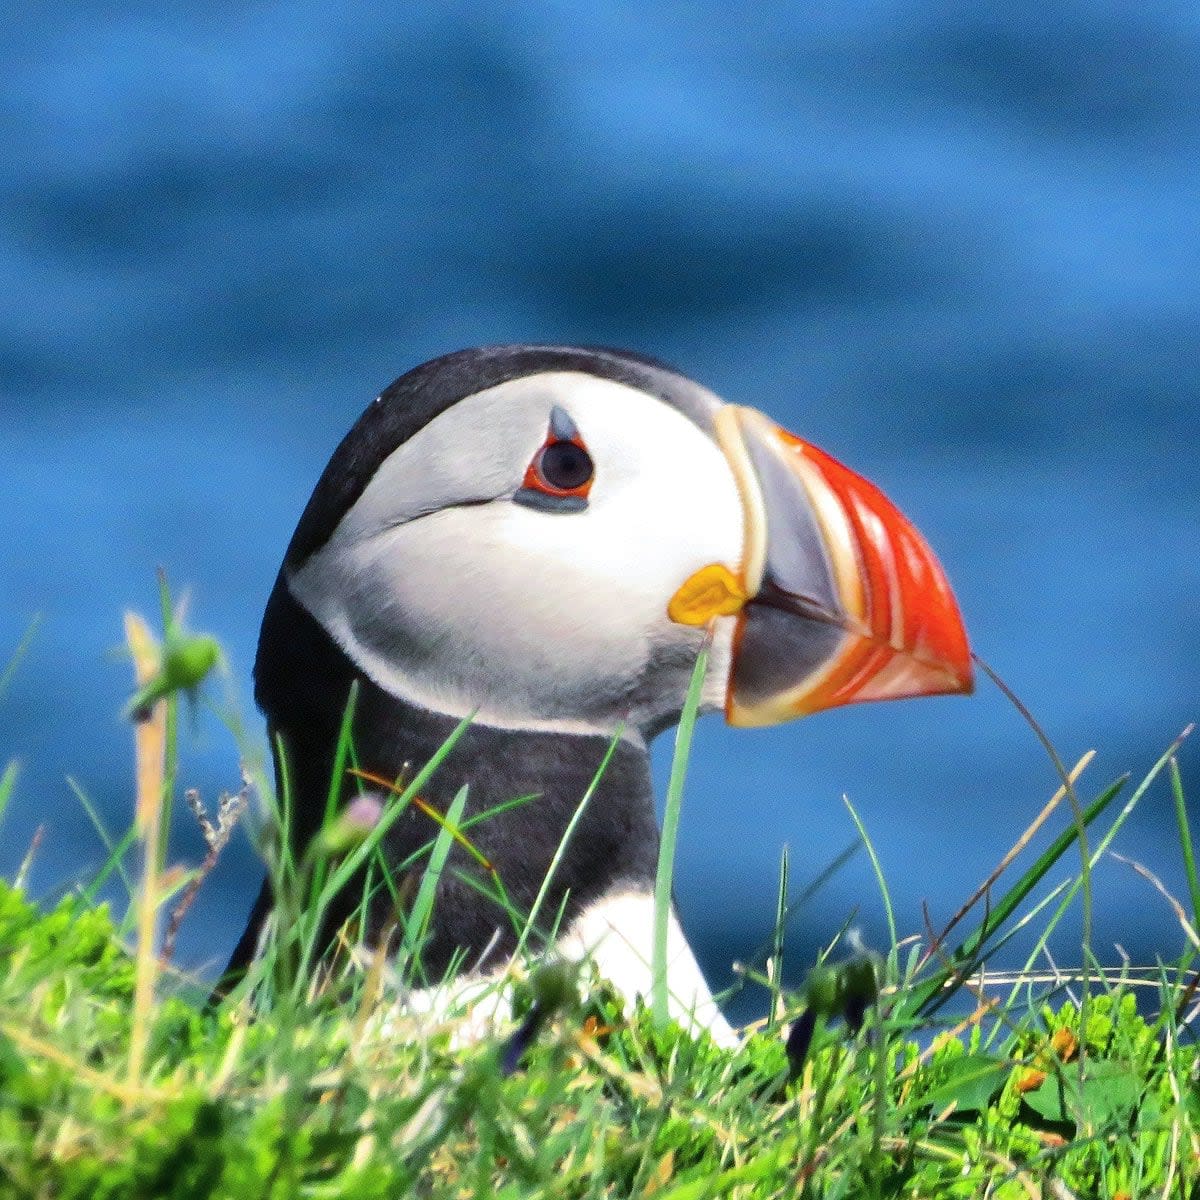 A puffin pokes its head out of its nest in Elliston. (Submitted by Mark Gray - image credit)